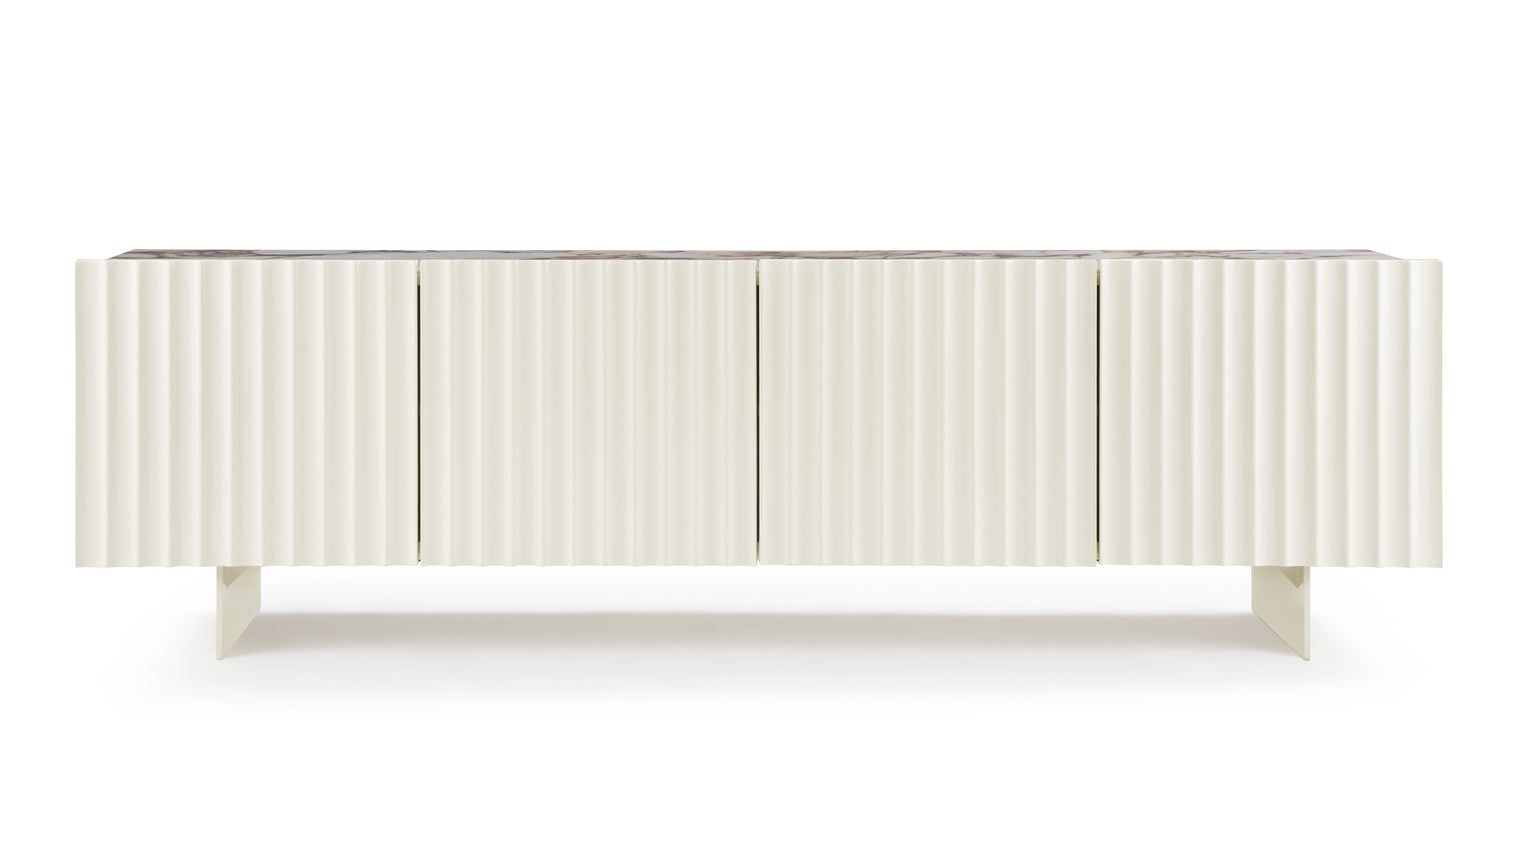 Cece - Cece Sideboard, Ivory and Ceramic